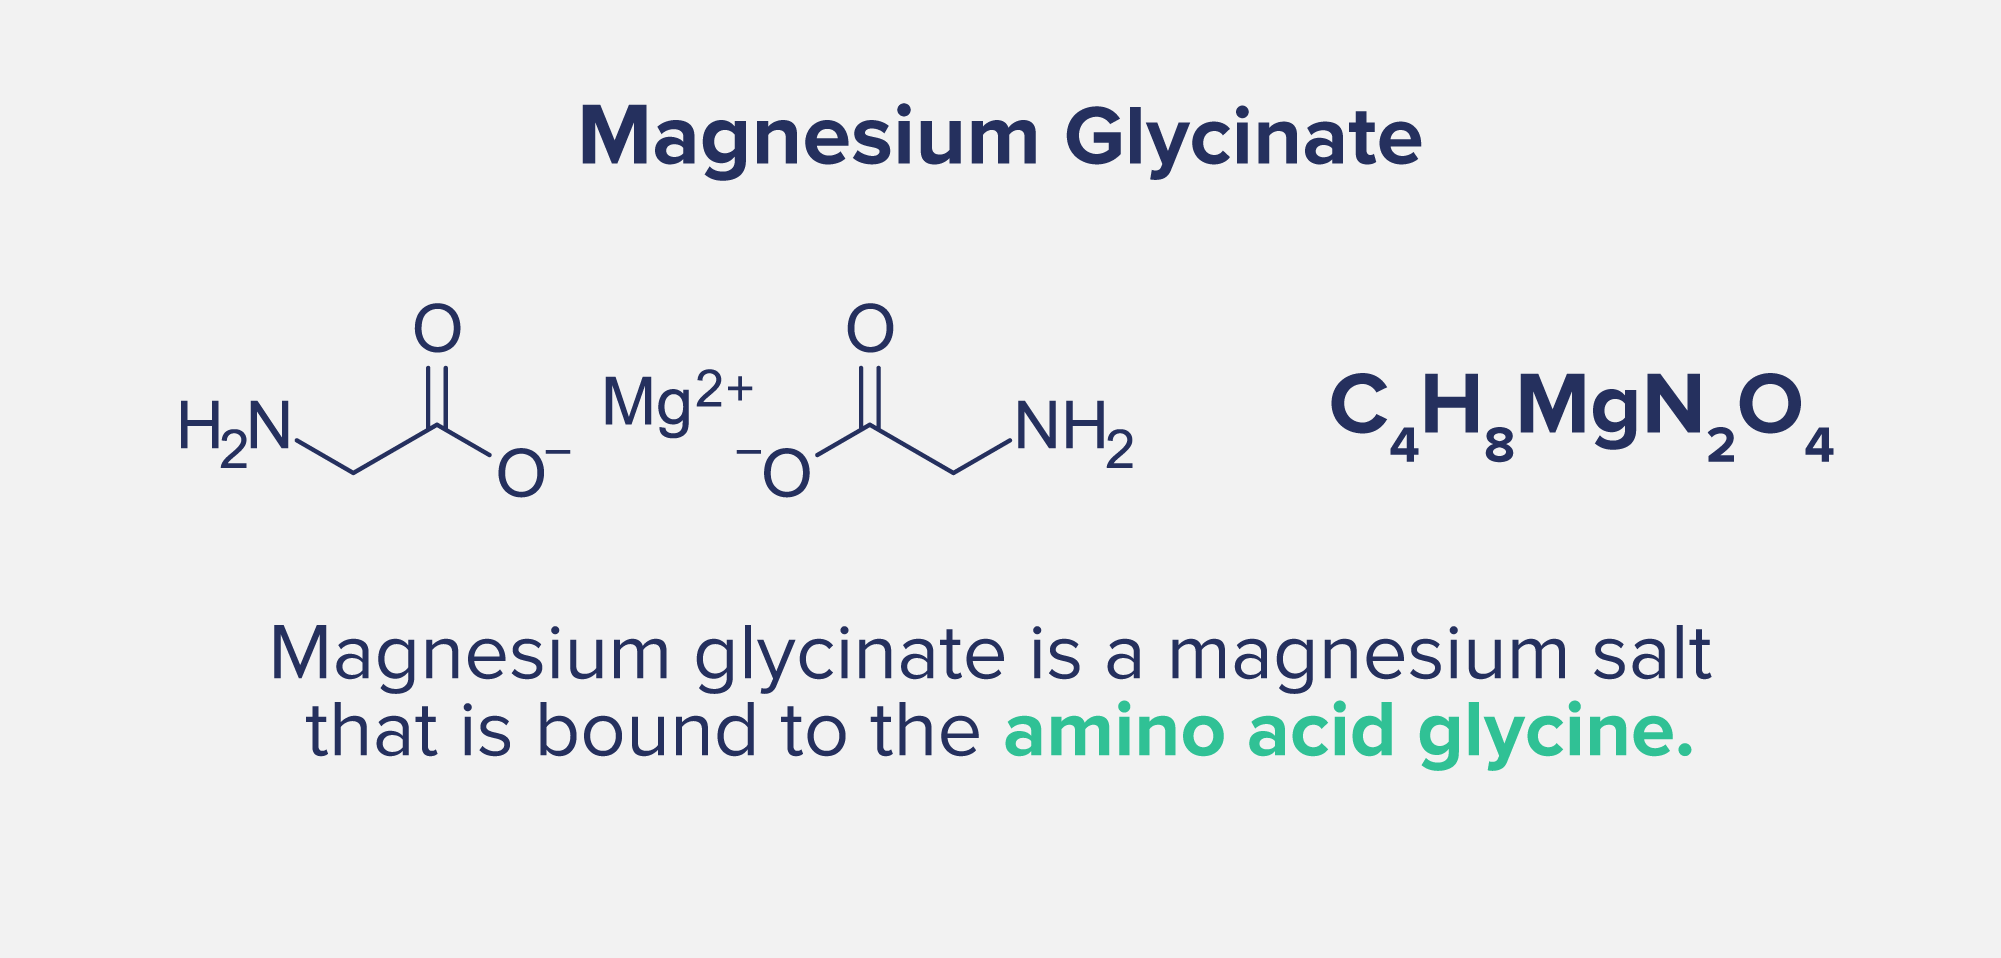 A graphic entitled "Magnesium Glycinate" depicting the chemical formula and the following statement: Magnesium glycinate is a magnesium salt that is bound to the amino acid glycine.